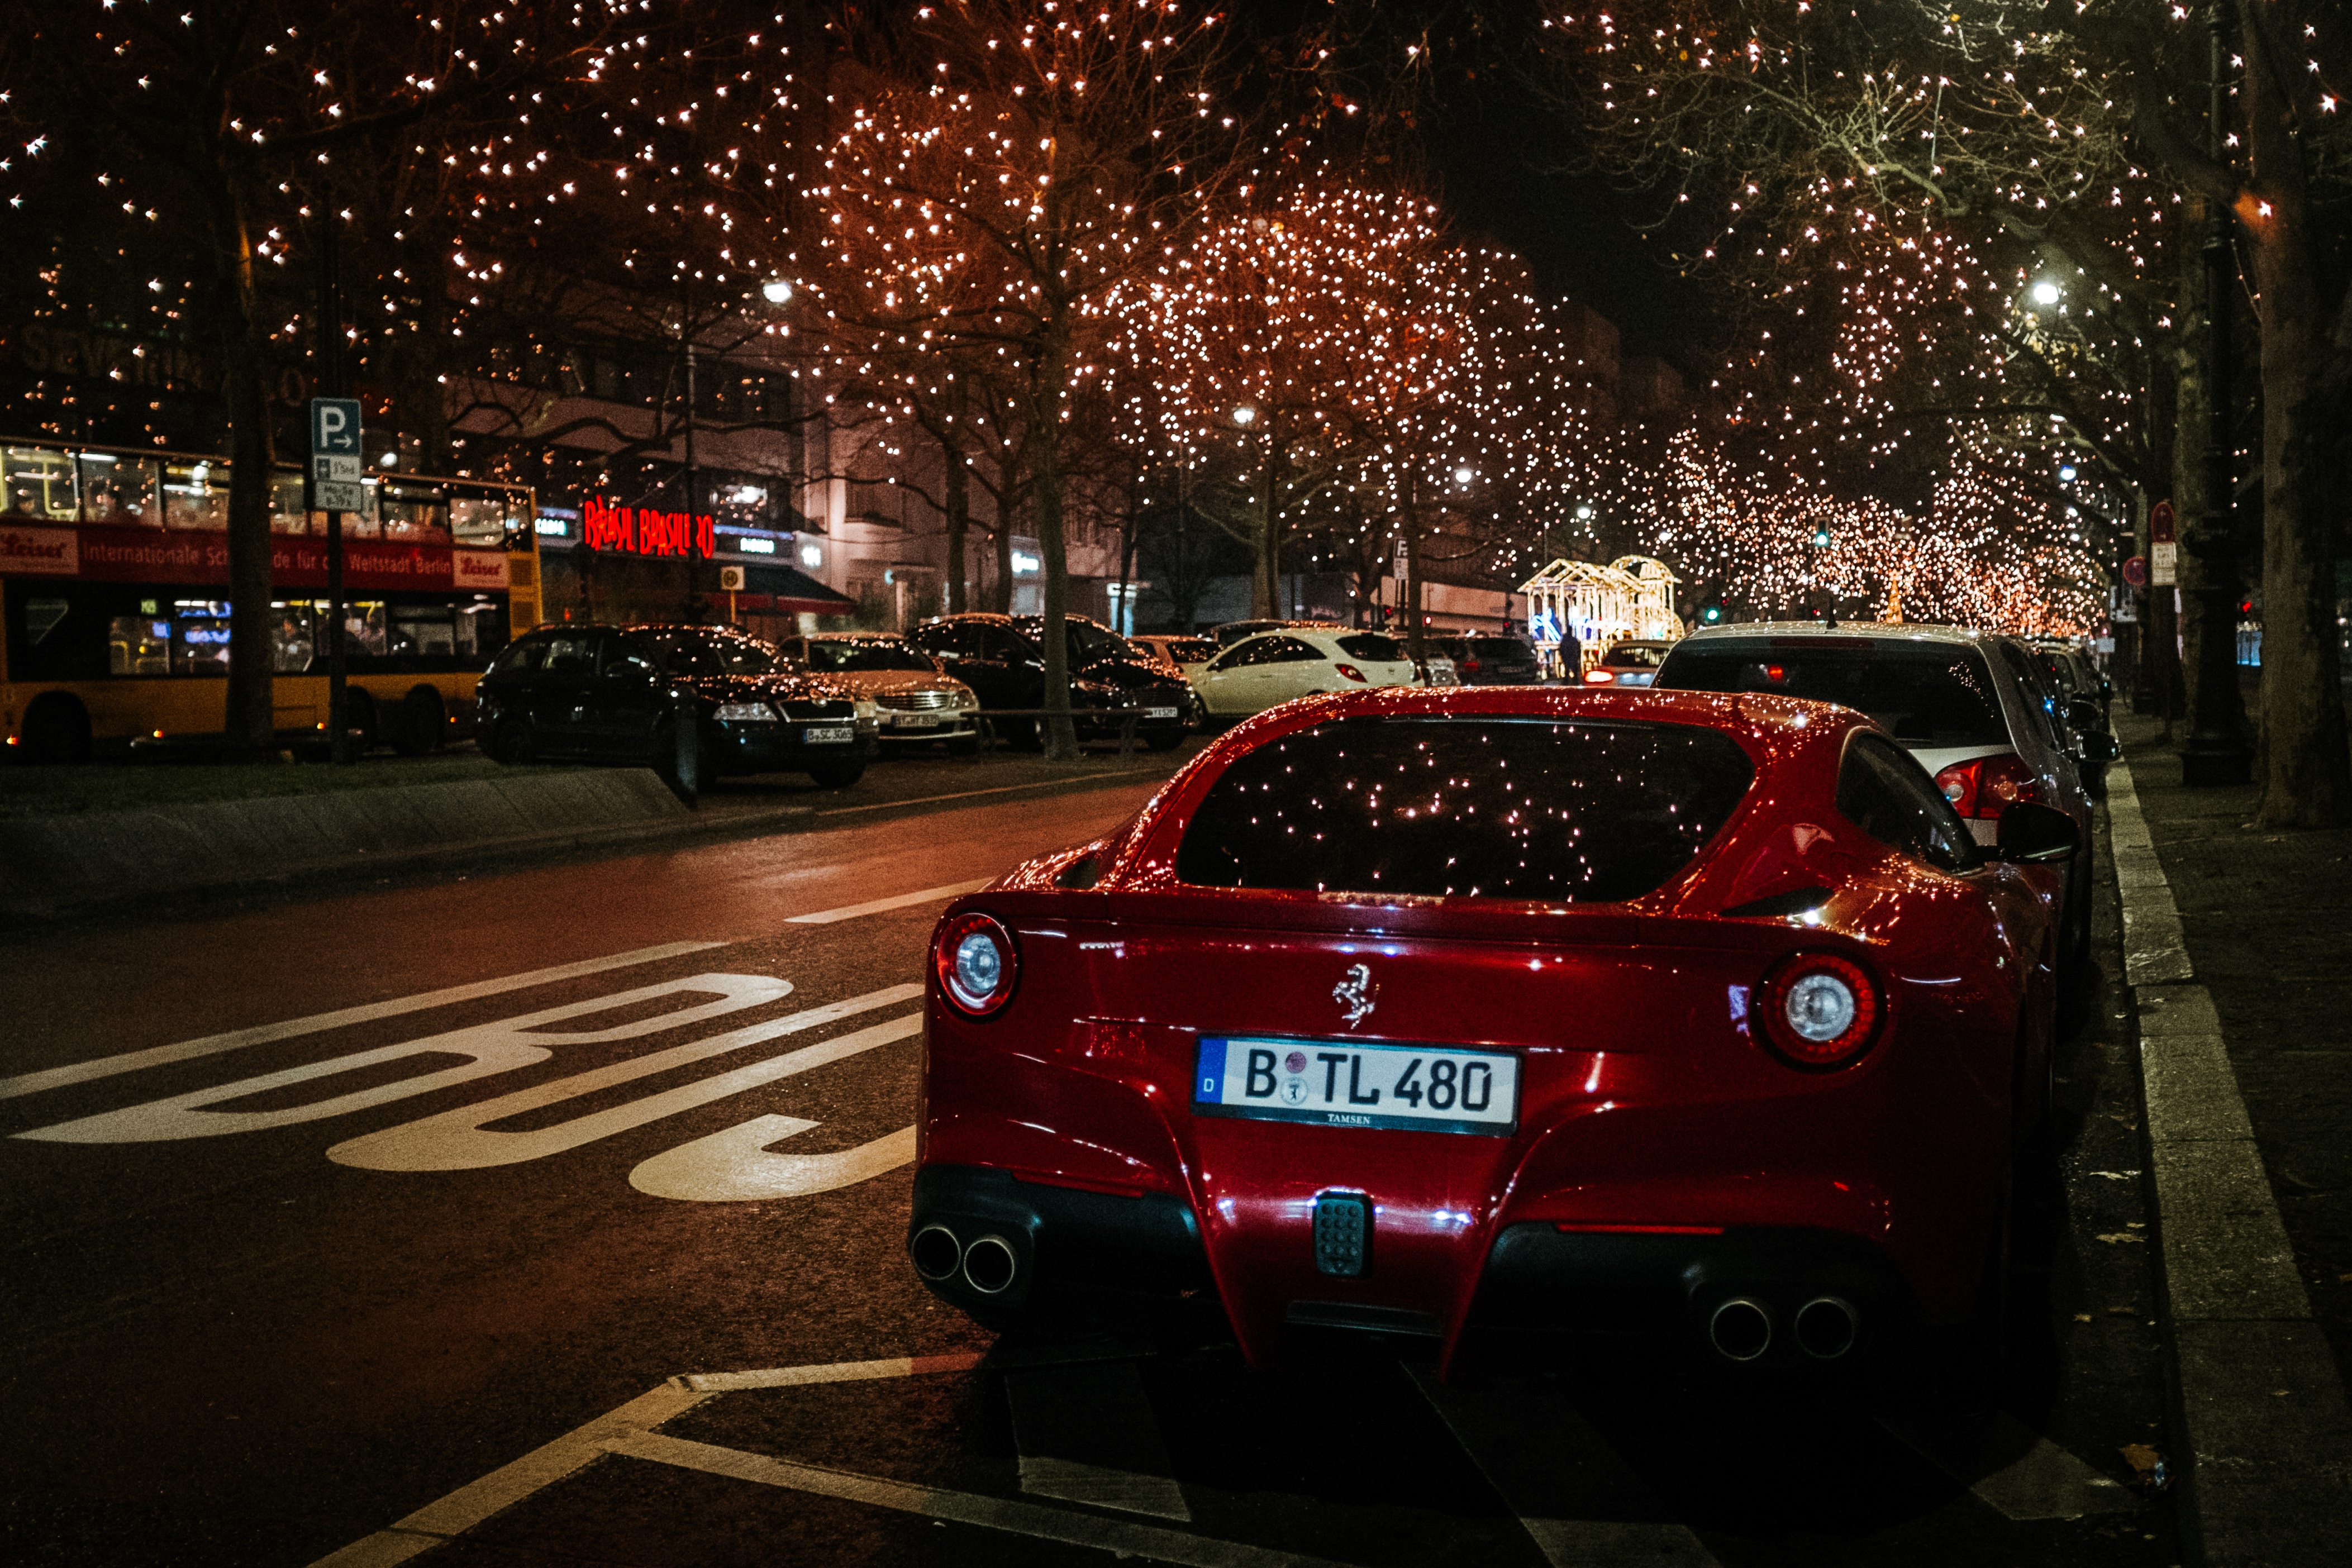 cars, back view, night city, ferrari, red, rear view, scenery